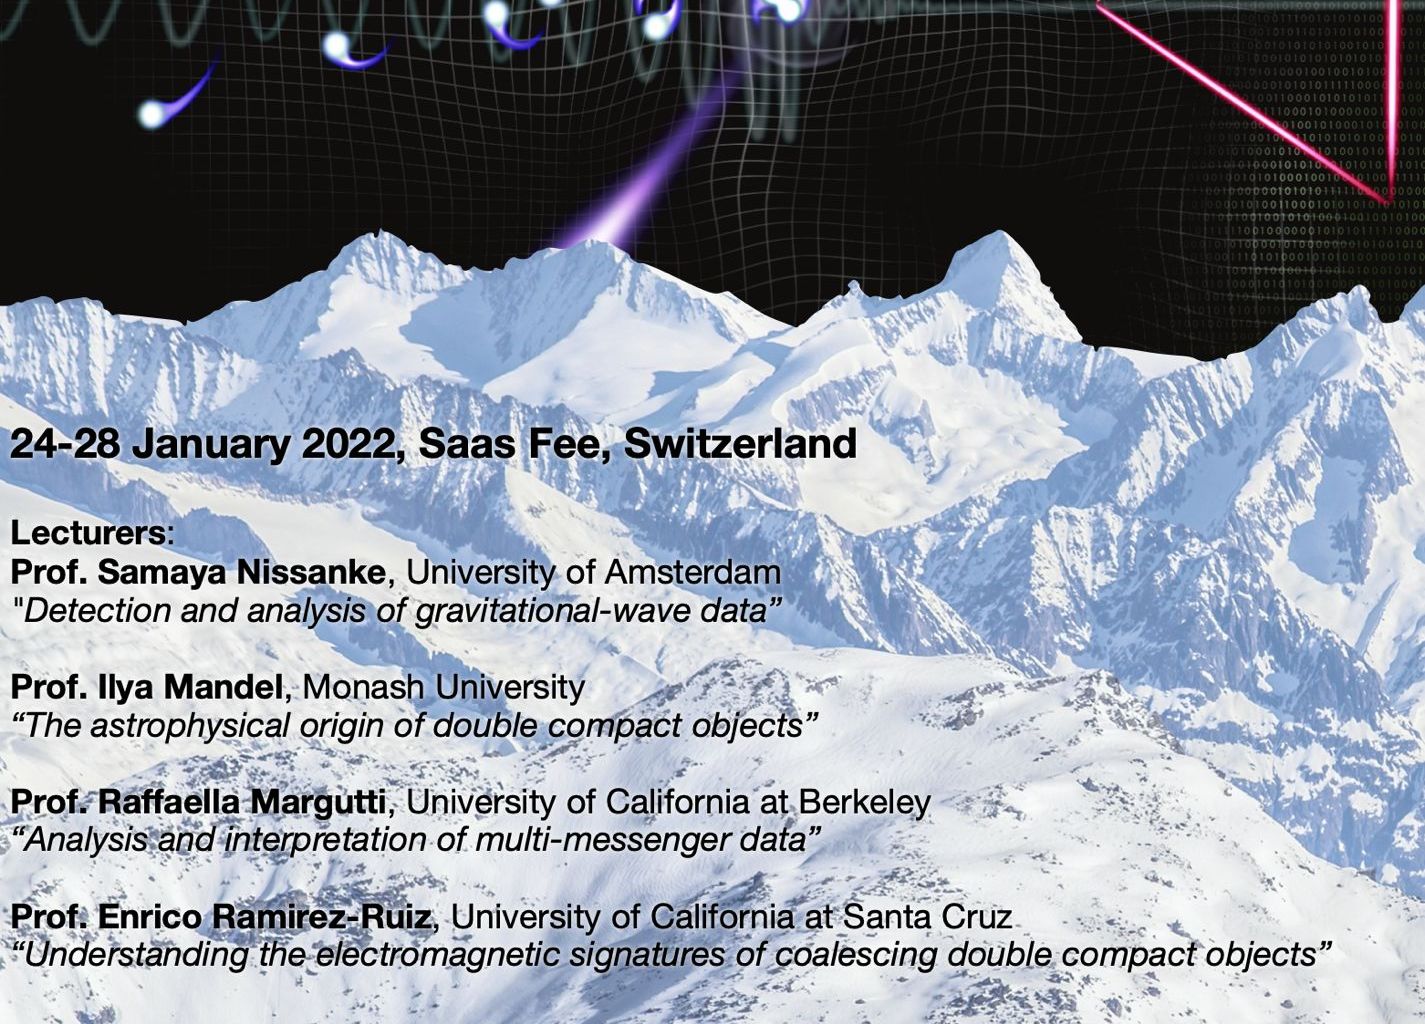 Poster du cours Saas Fee 2022